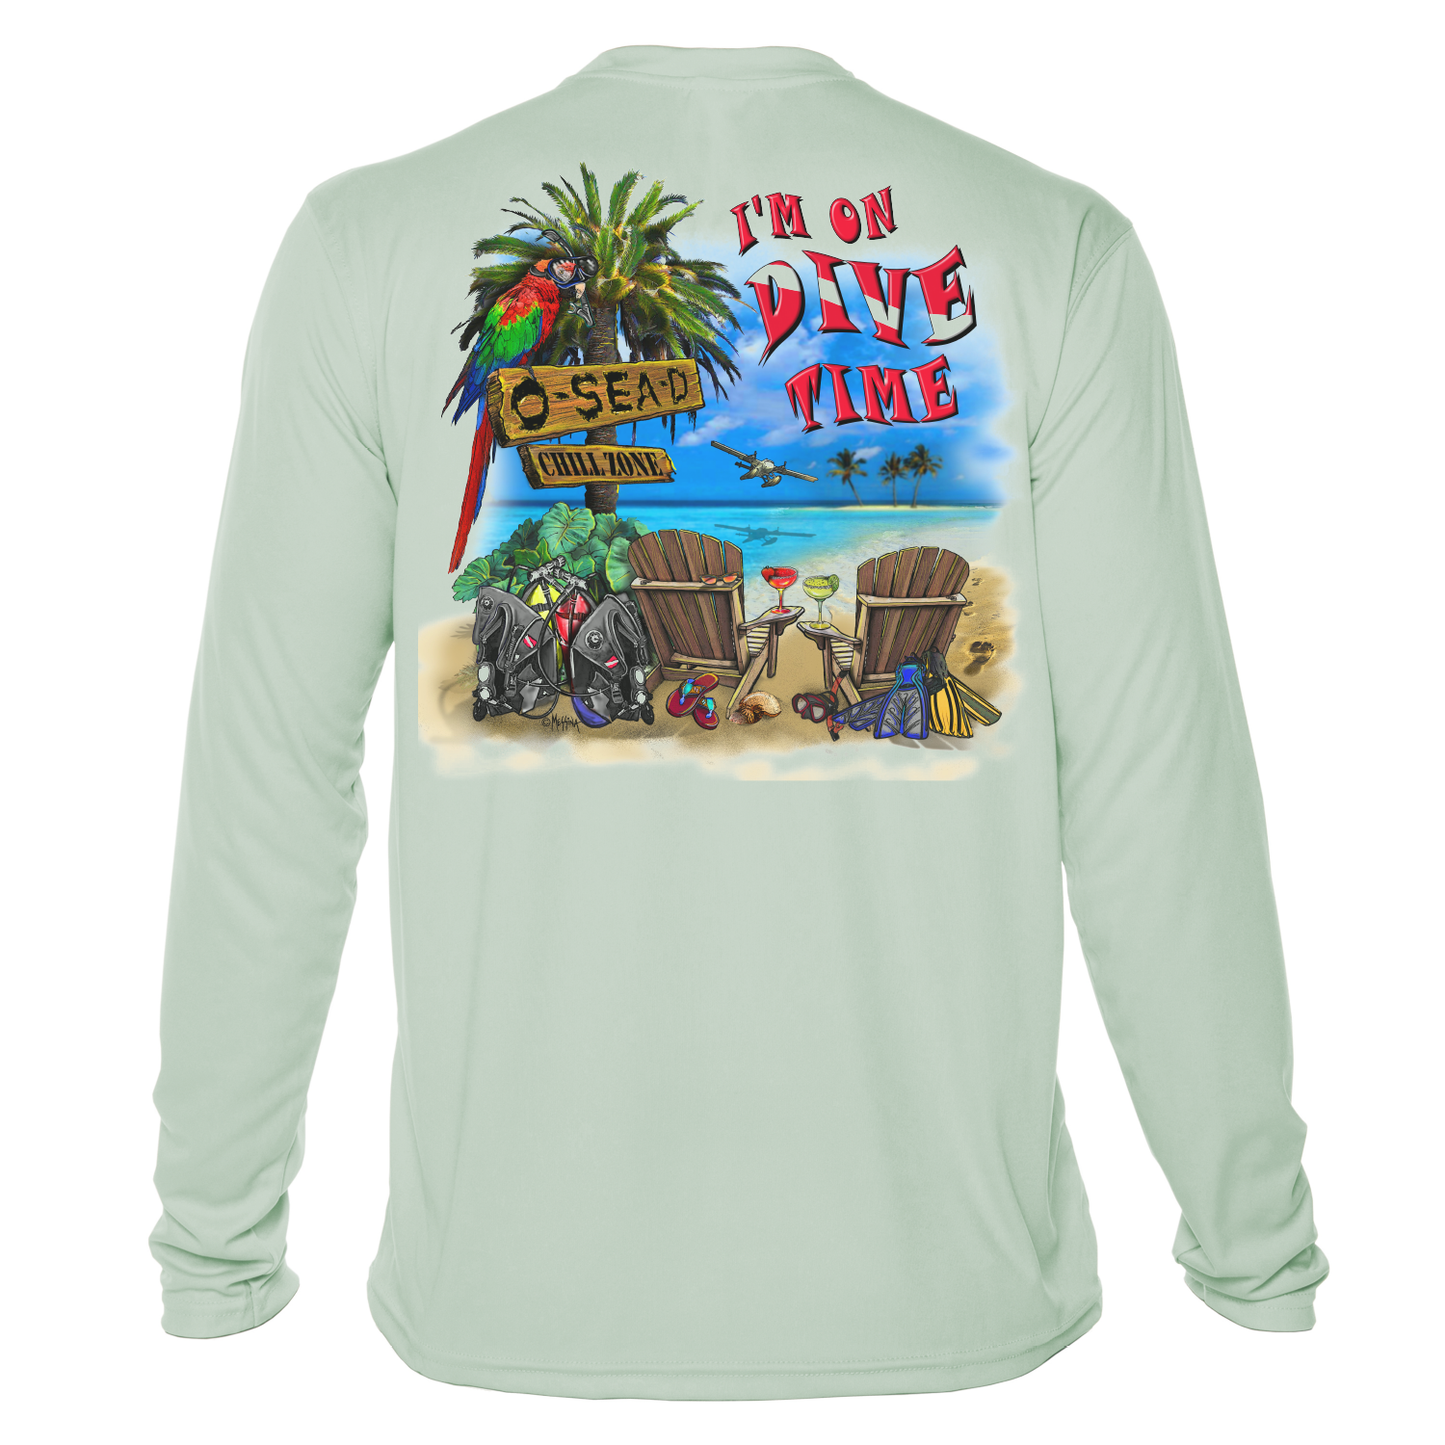 Dive Time - Long Sleeve